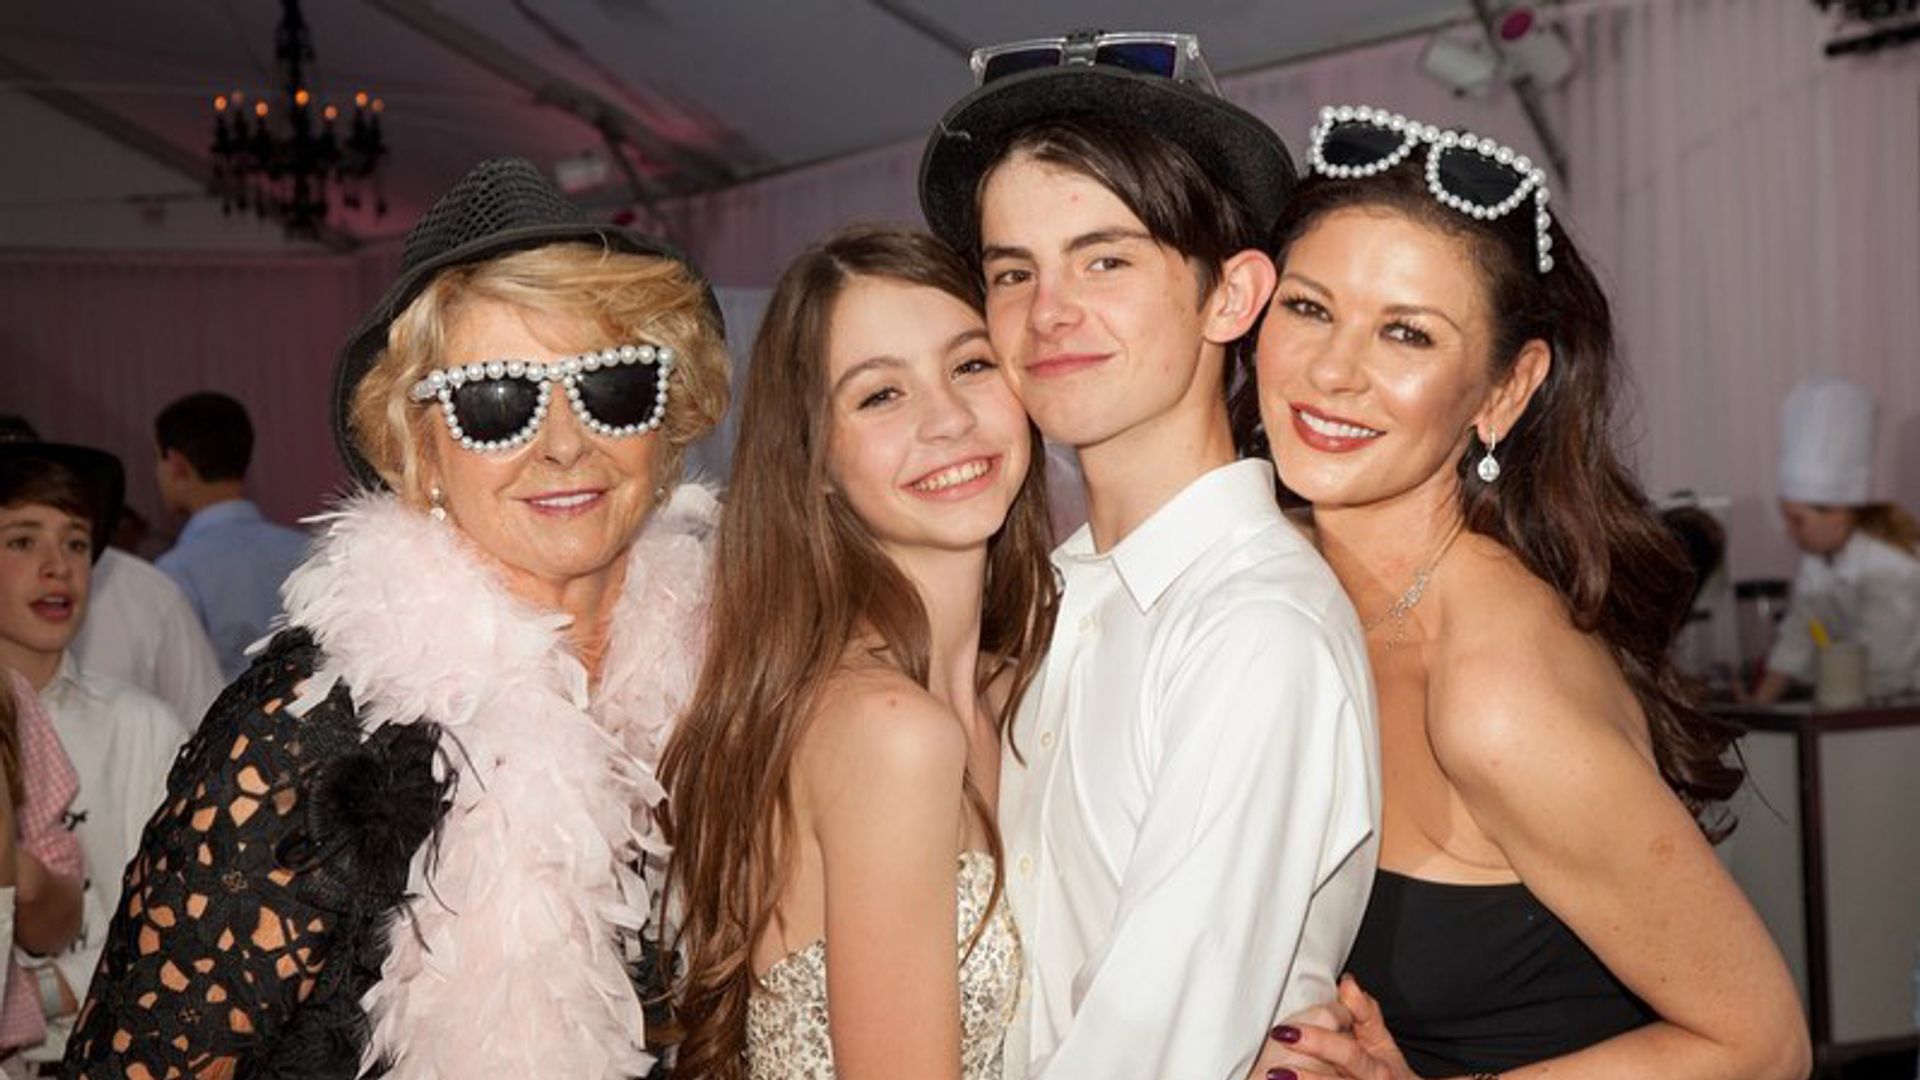 Catherine shared the sweetest photo of her mother Patricia with Carys and Dylan Douglas to mark Mother's Day